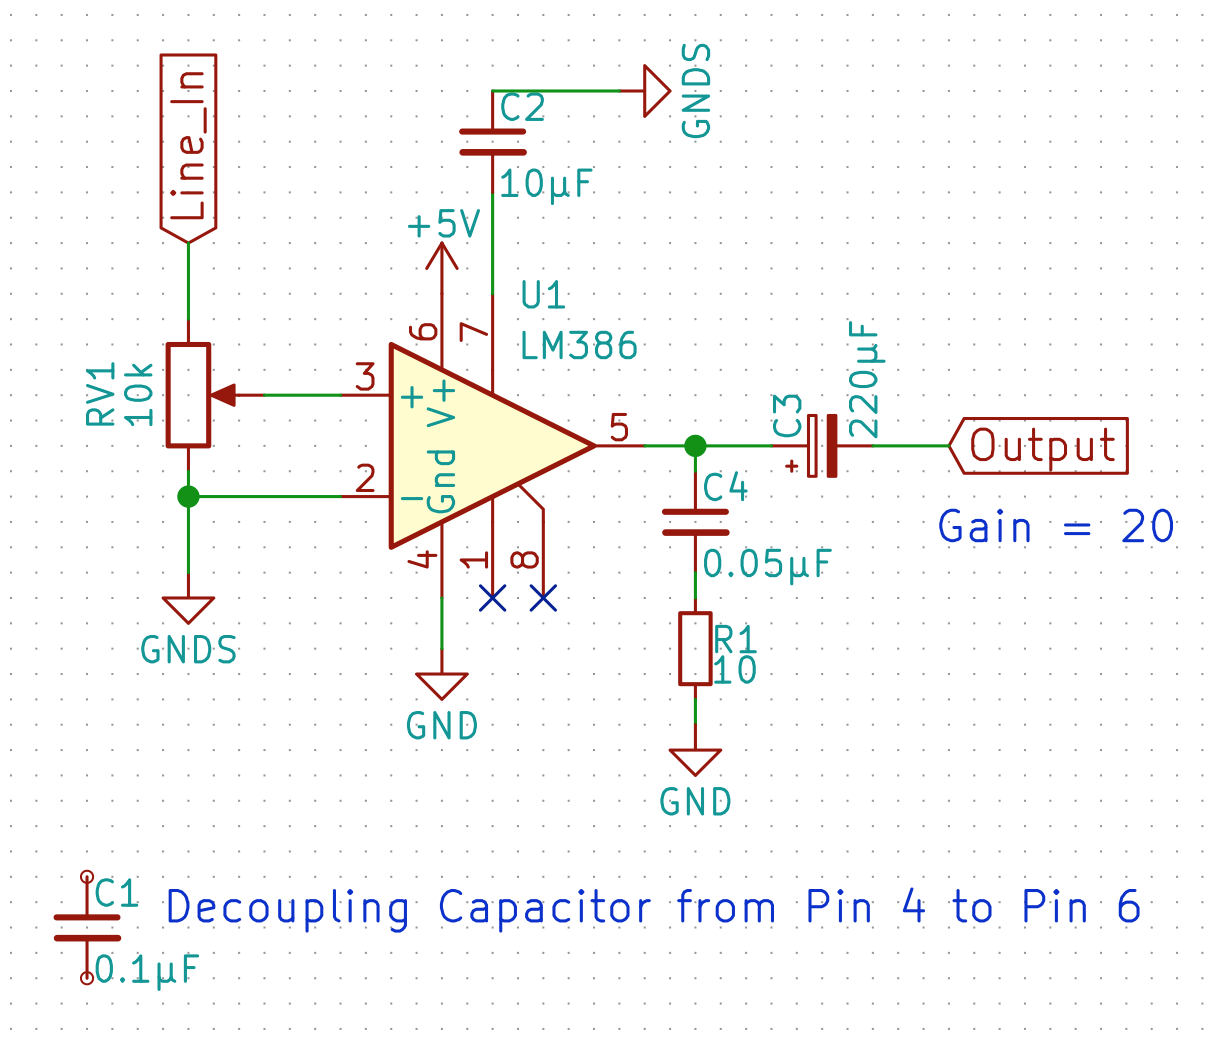 LM386 with 5v and minimum parts